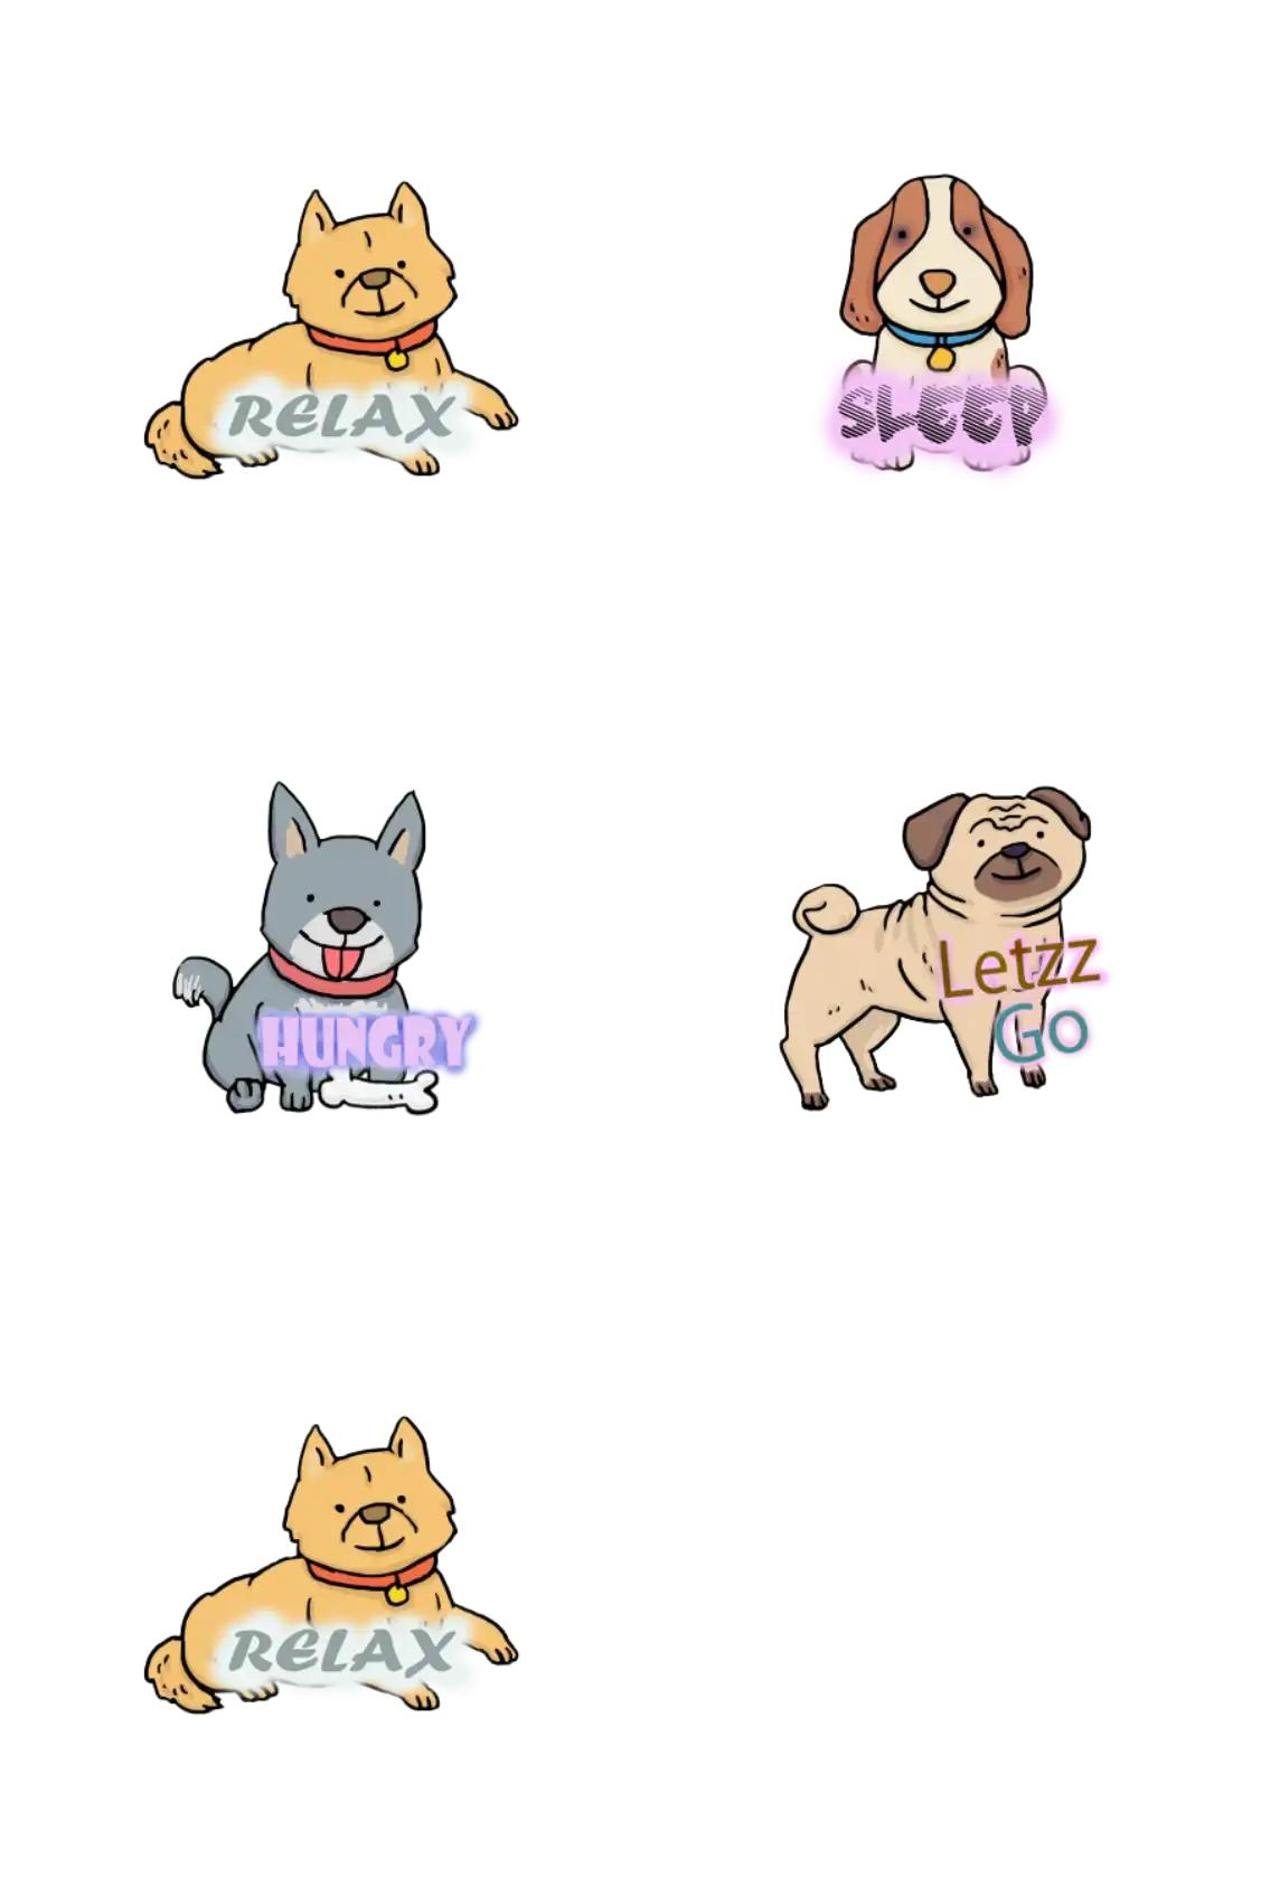 DOGGY Animals,Phrases sticker pack for Whatsapp, Telegram, Signal, and others chatting and message apps